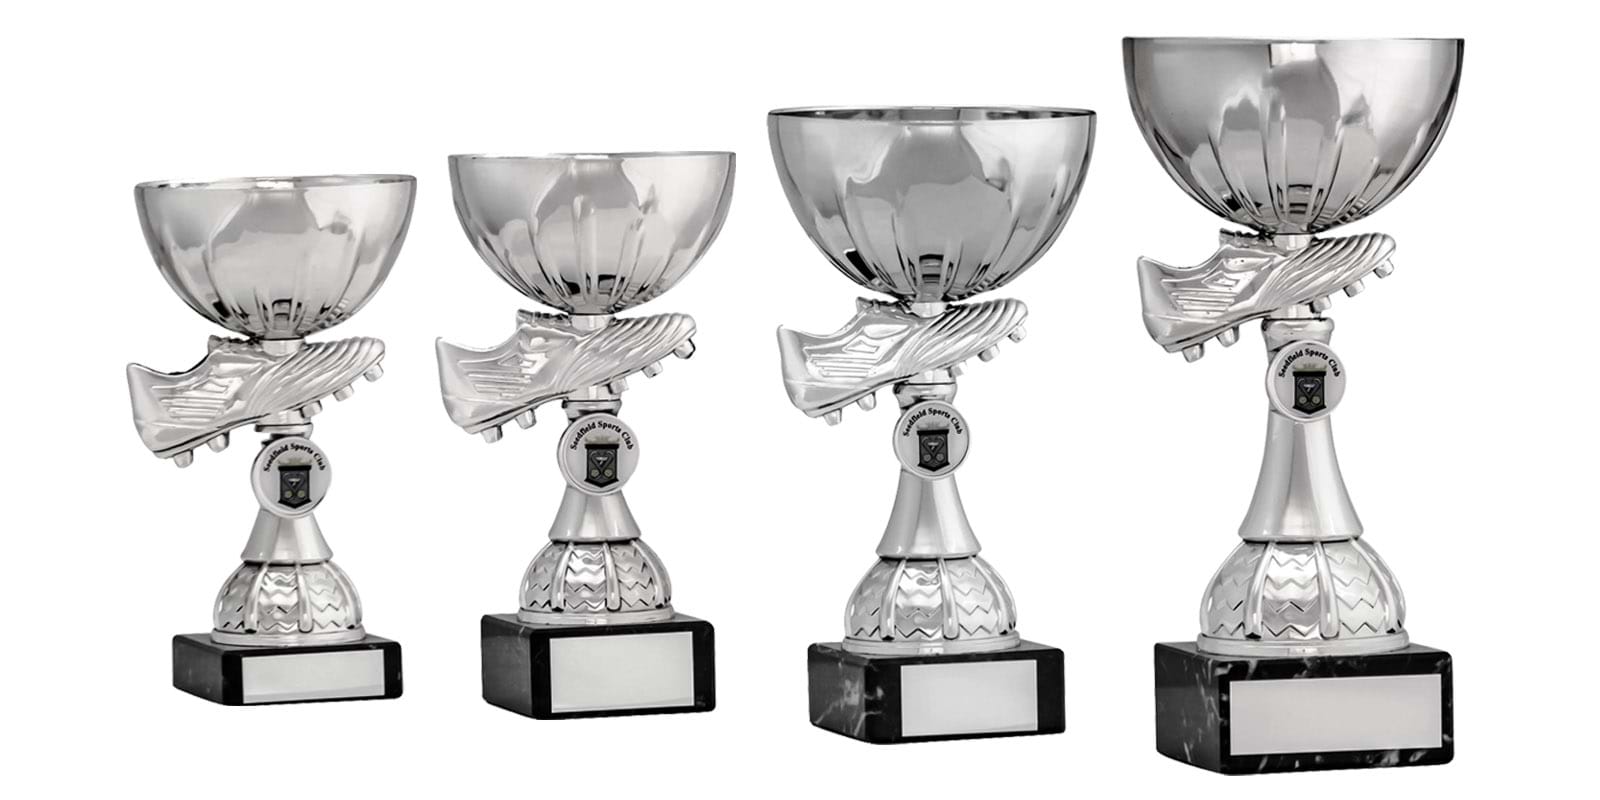 Silver Football BootTrophy Cup Awards 1883 Series